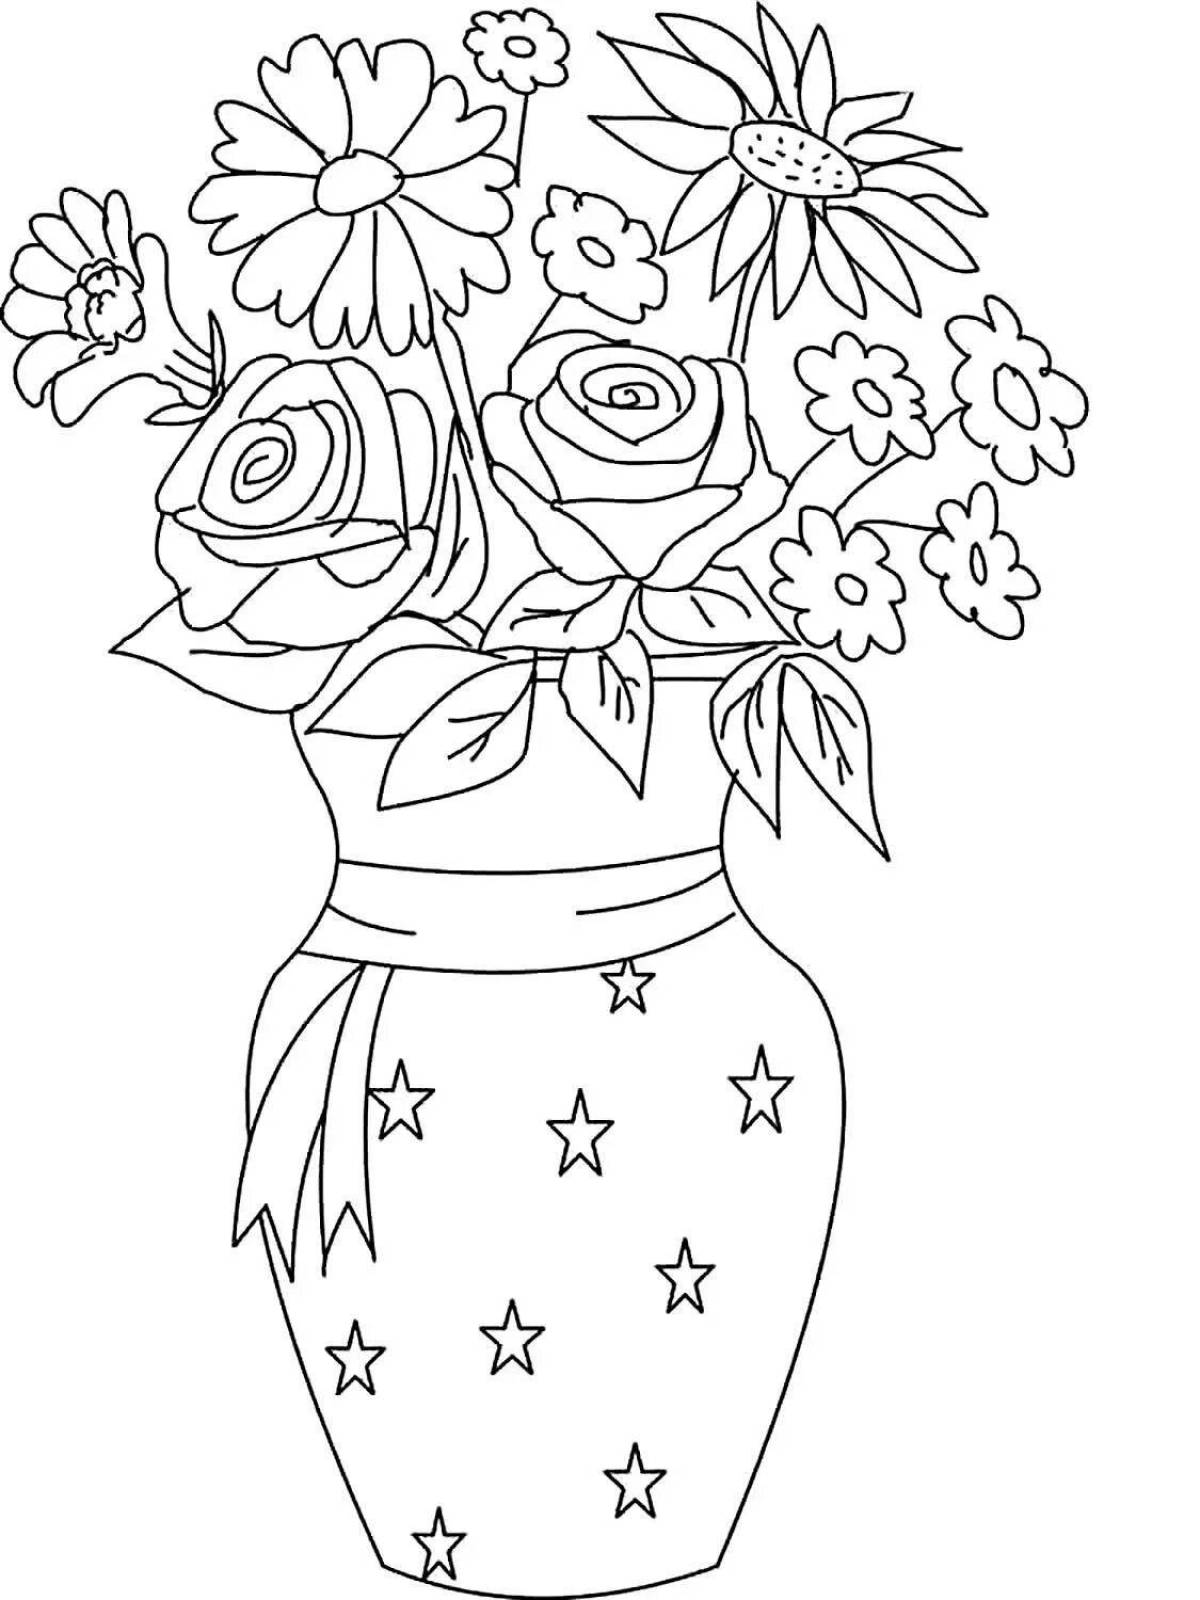 Brightly colored large flowers in a vase coloring book